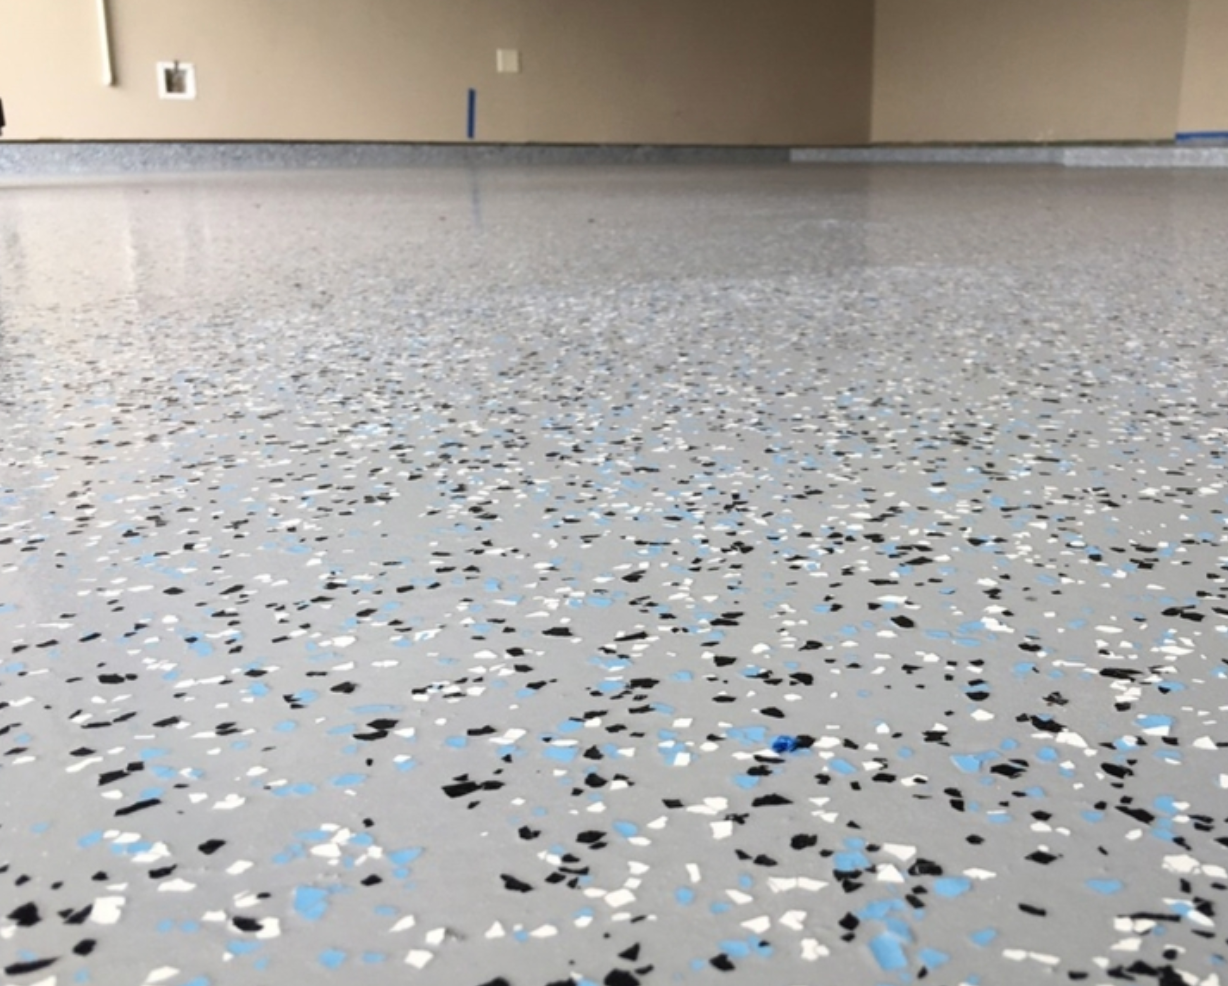 Flooring Epoxy Resin 2 Gallon Kit for Concrete Garage Floors Interior with  Paint Chips Concrete - China Epoxy Flooring, Epoxy Resin System